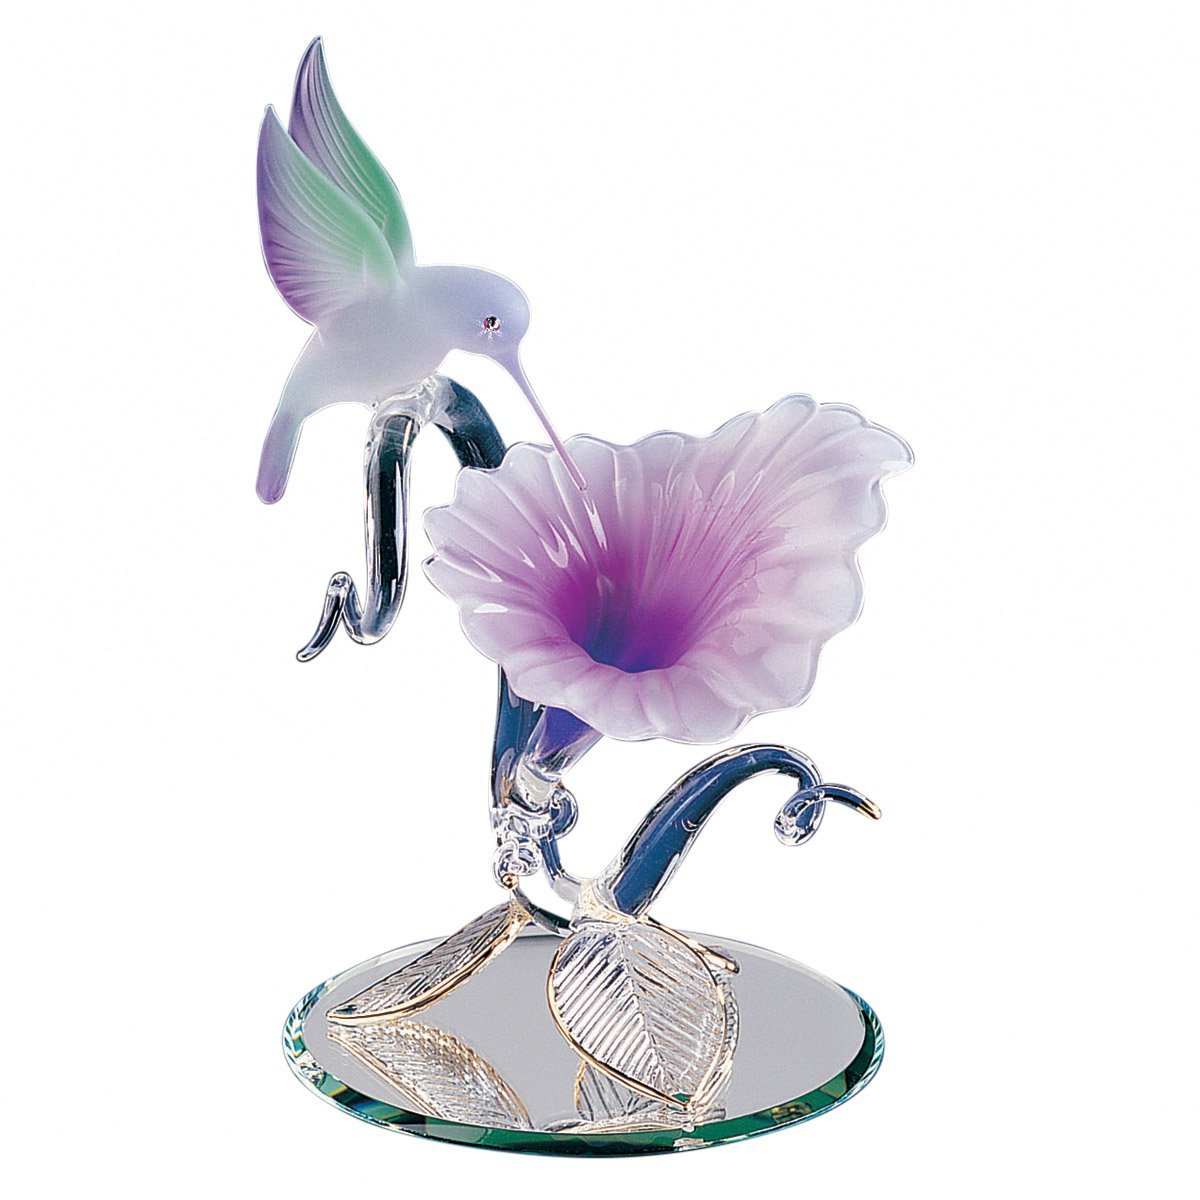 Glass Hummingbird Fuchsia Flower Figurine Accented with Crystals